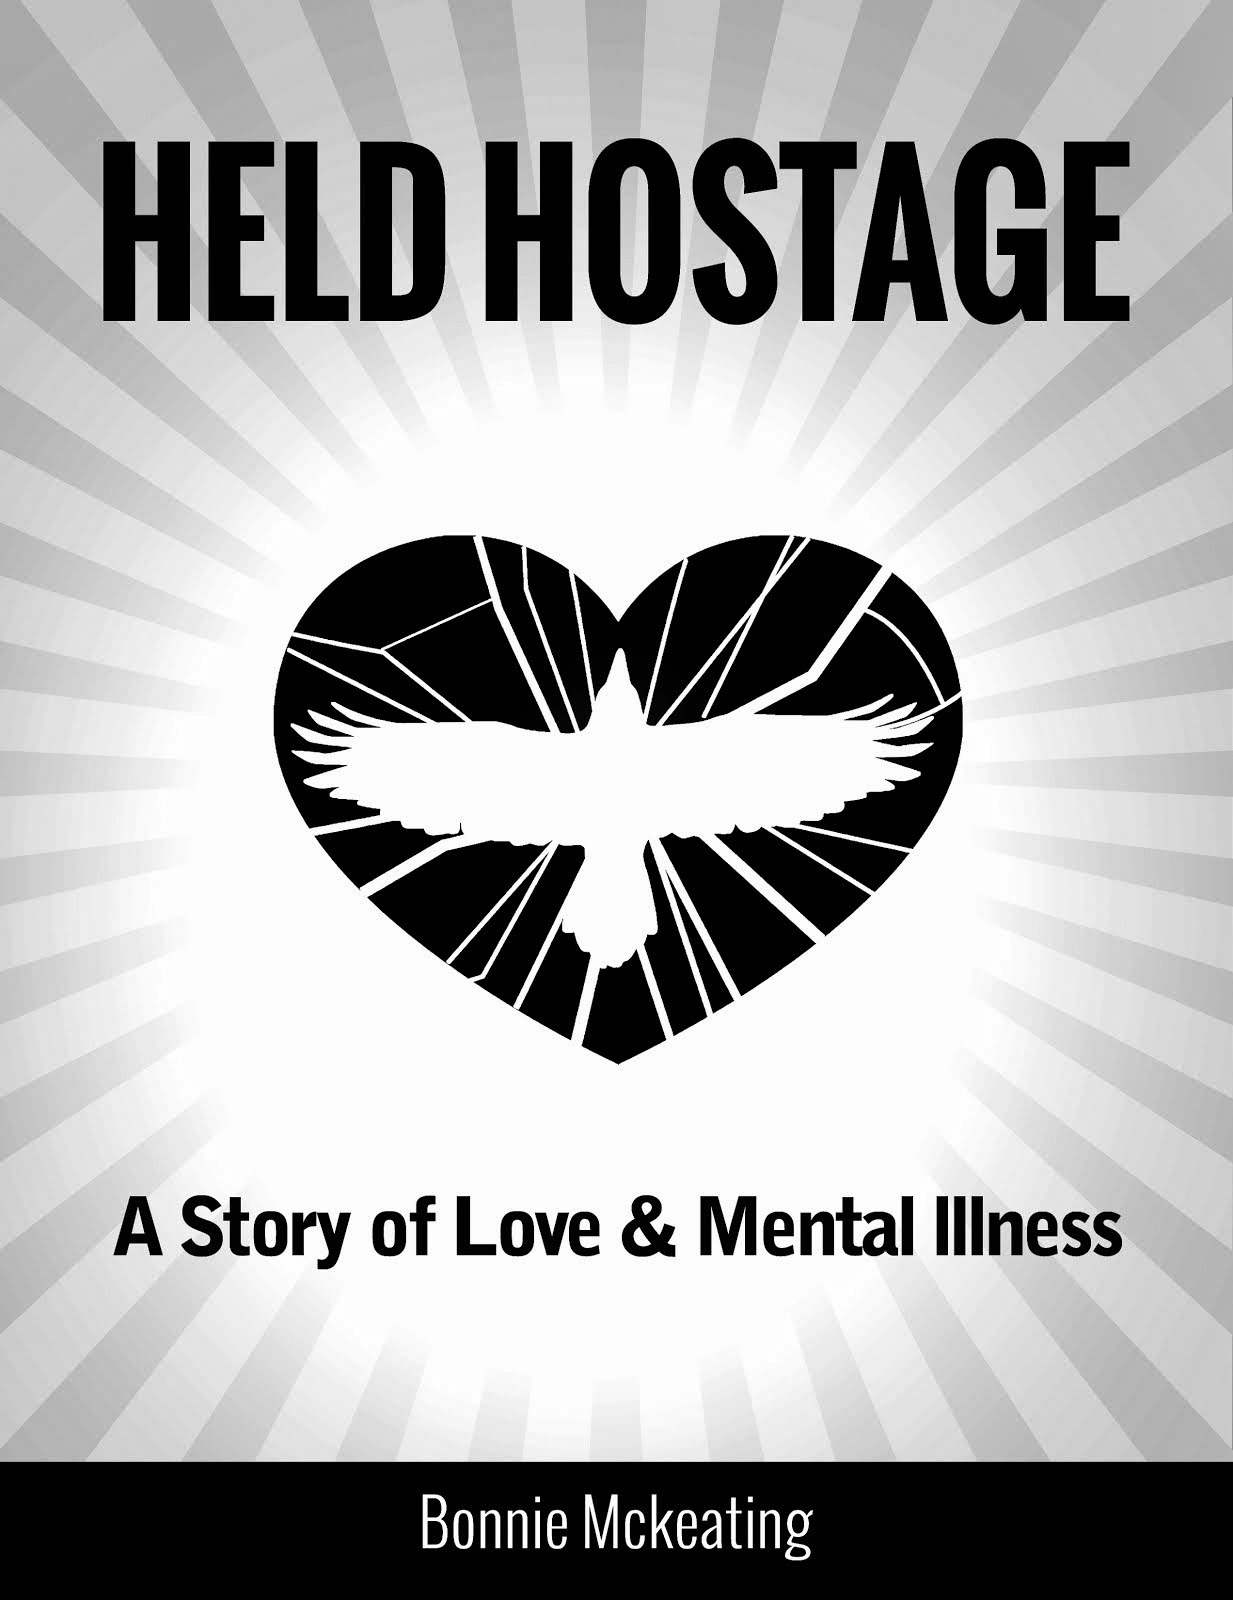 My first novel - Held Hostage!